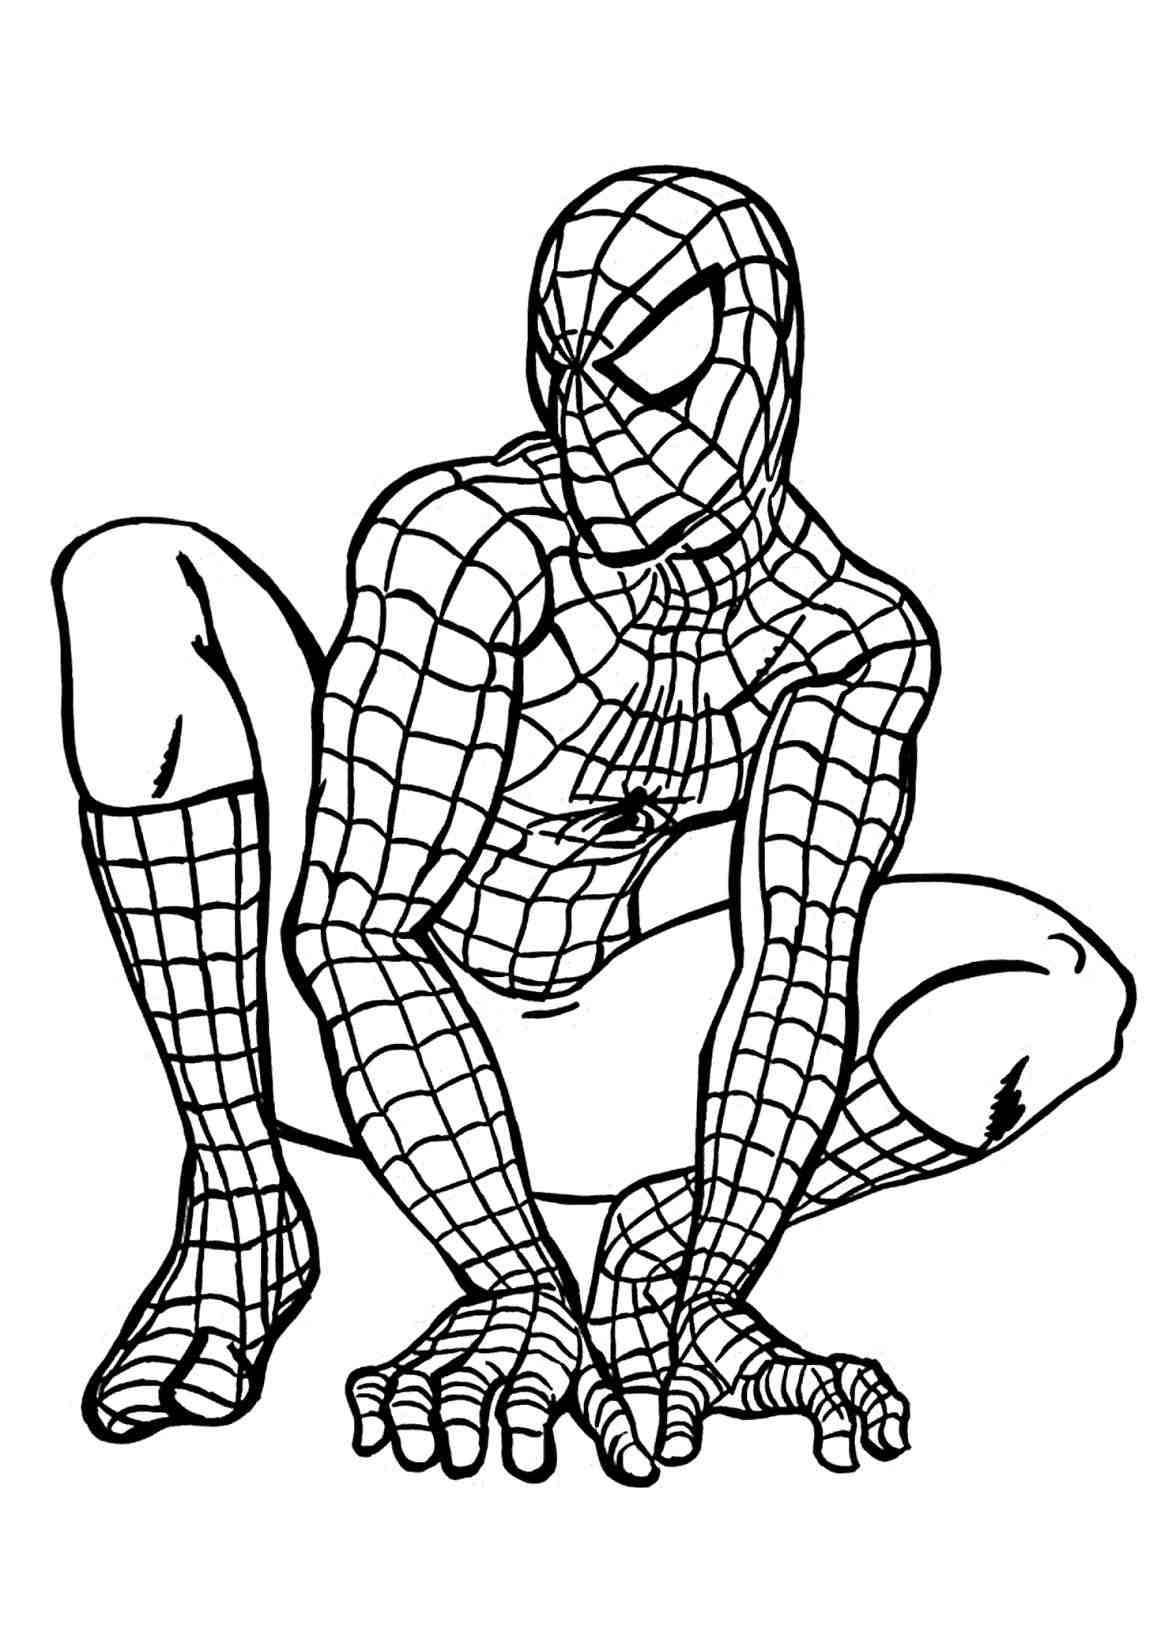 Spiderman drawing step by at free for jpg